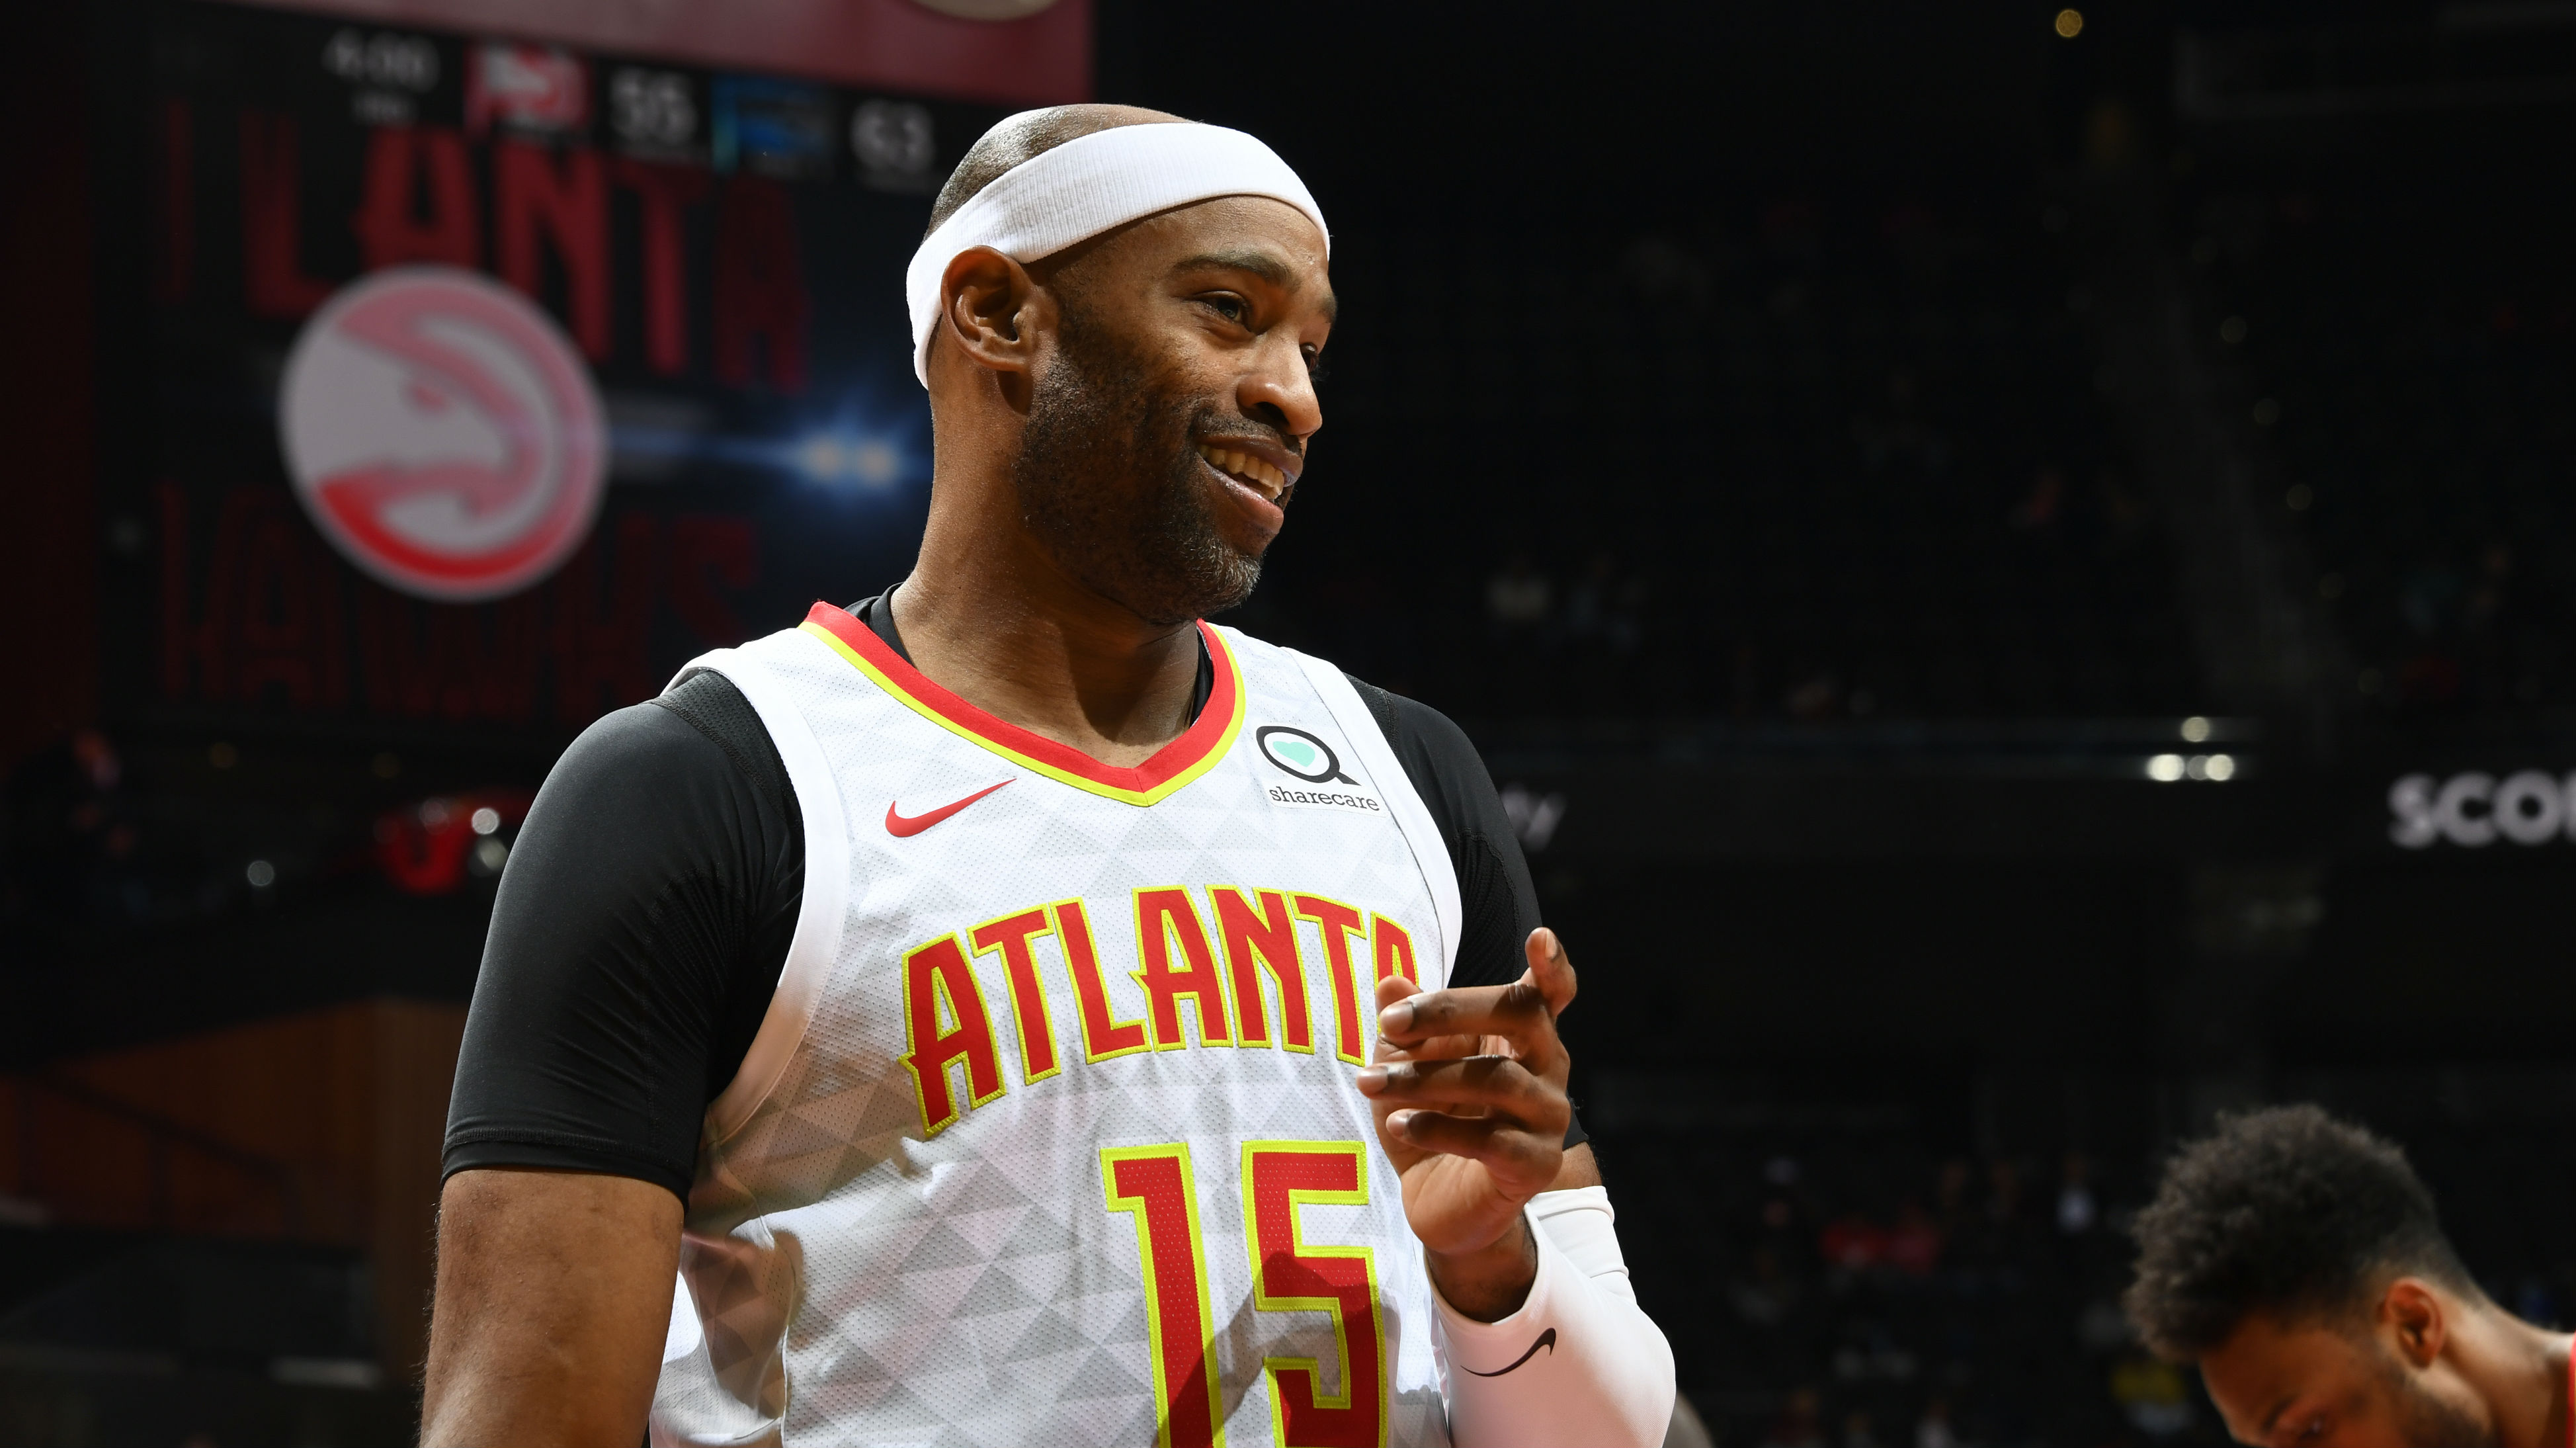 Vince Carter makes NBA history by being the first player whose career spanned four decades. Image via NBA.